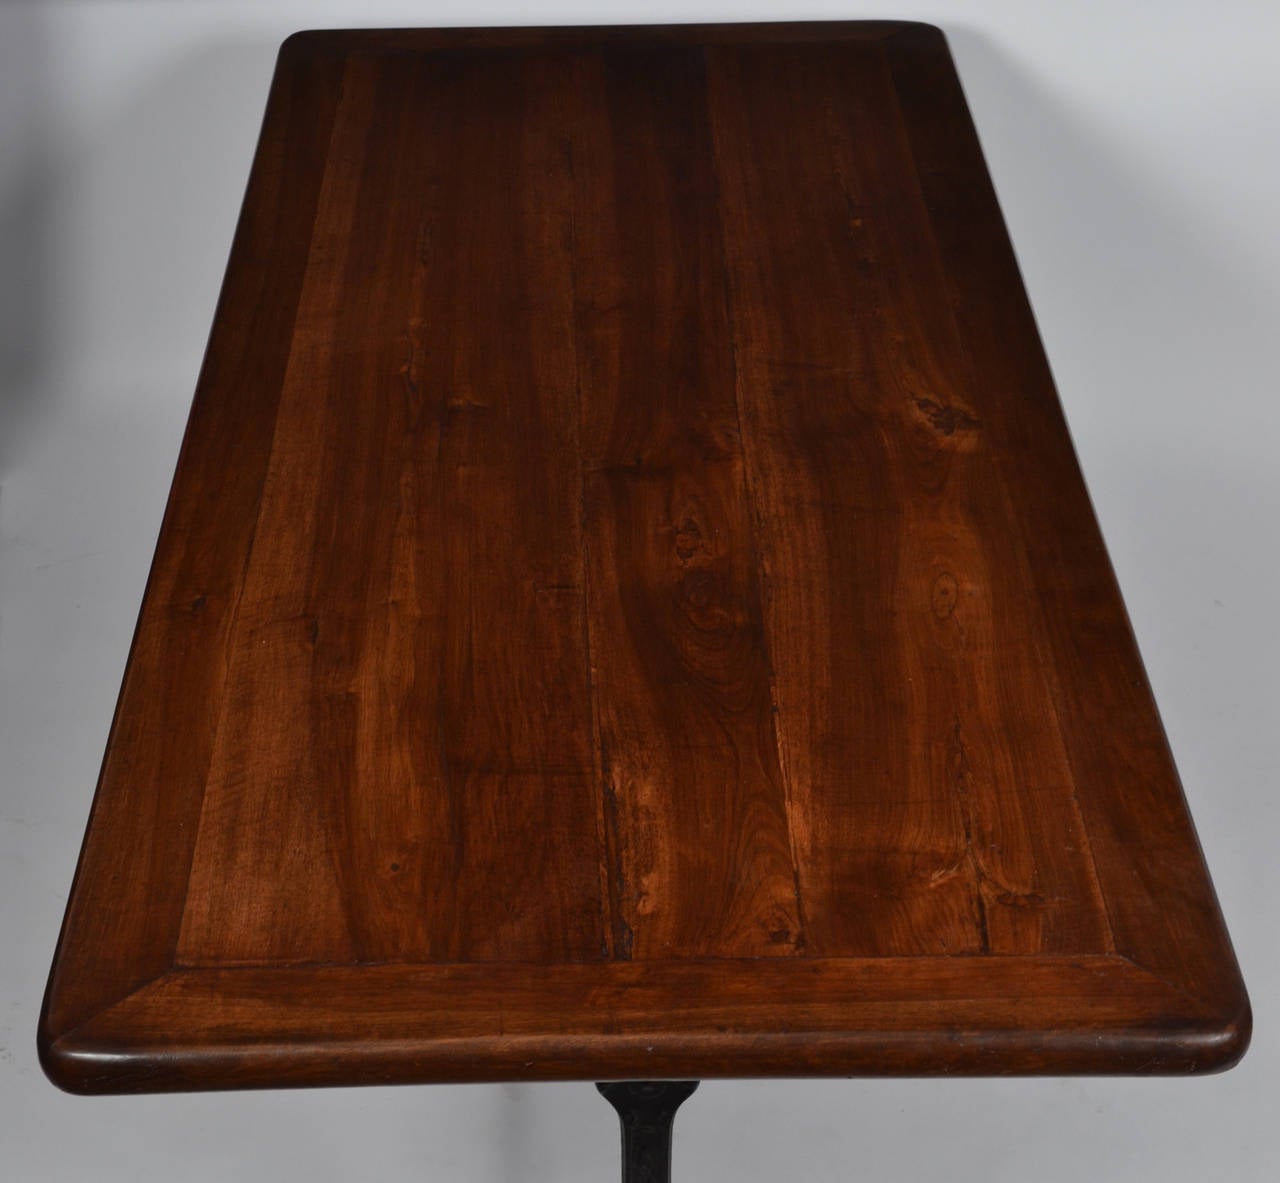 Art Nouveau French Antique Solid Walnut Vineyard Table from Beaujolais Region